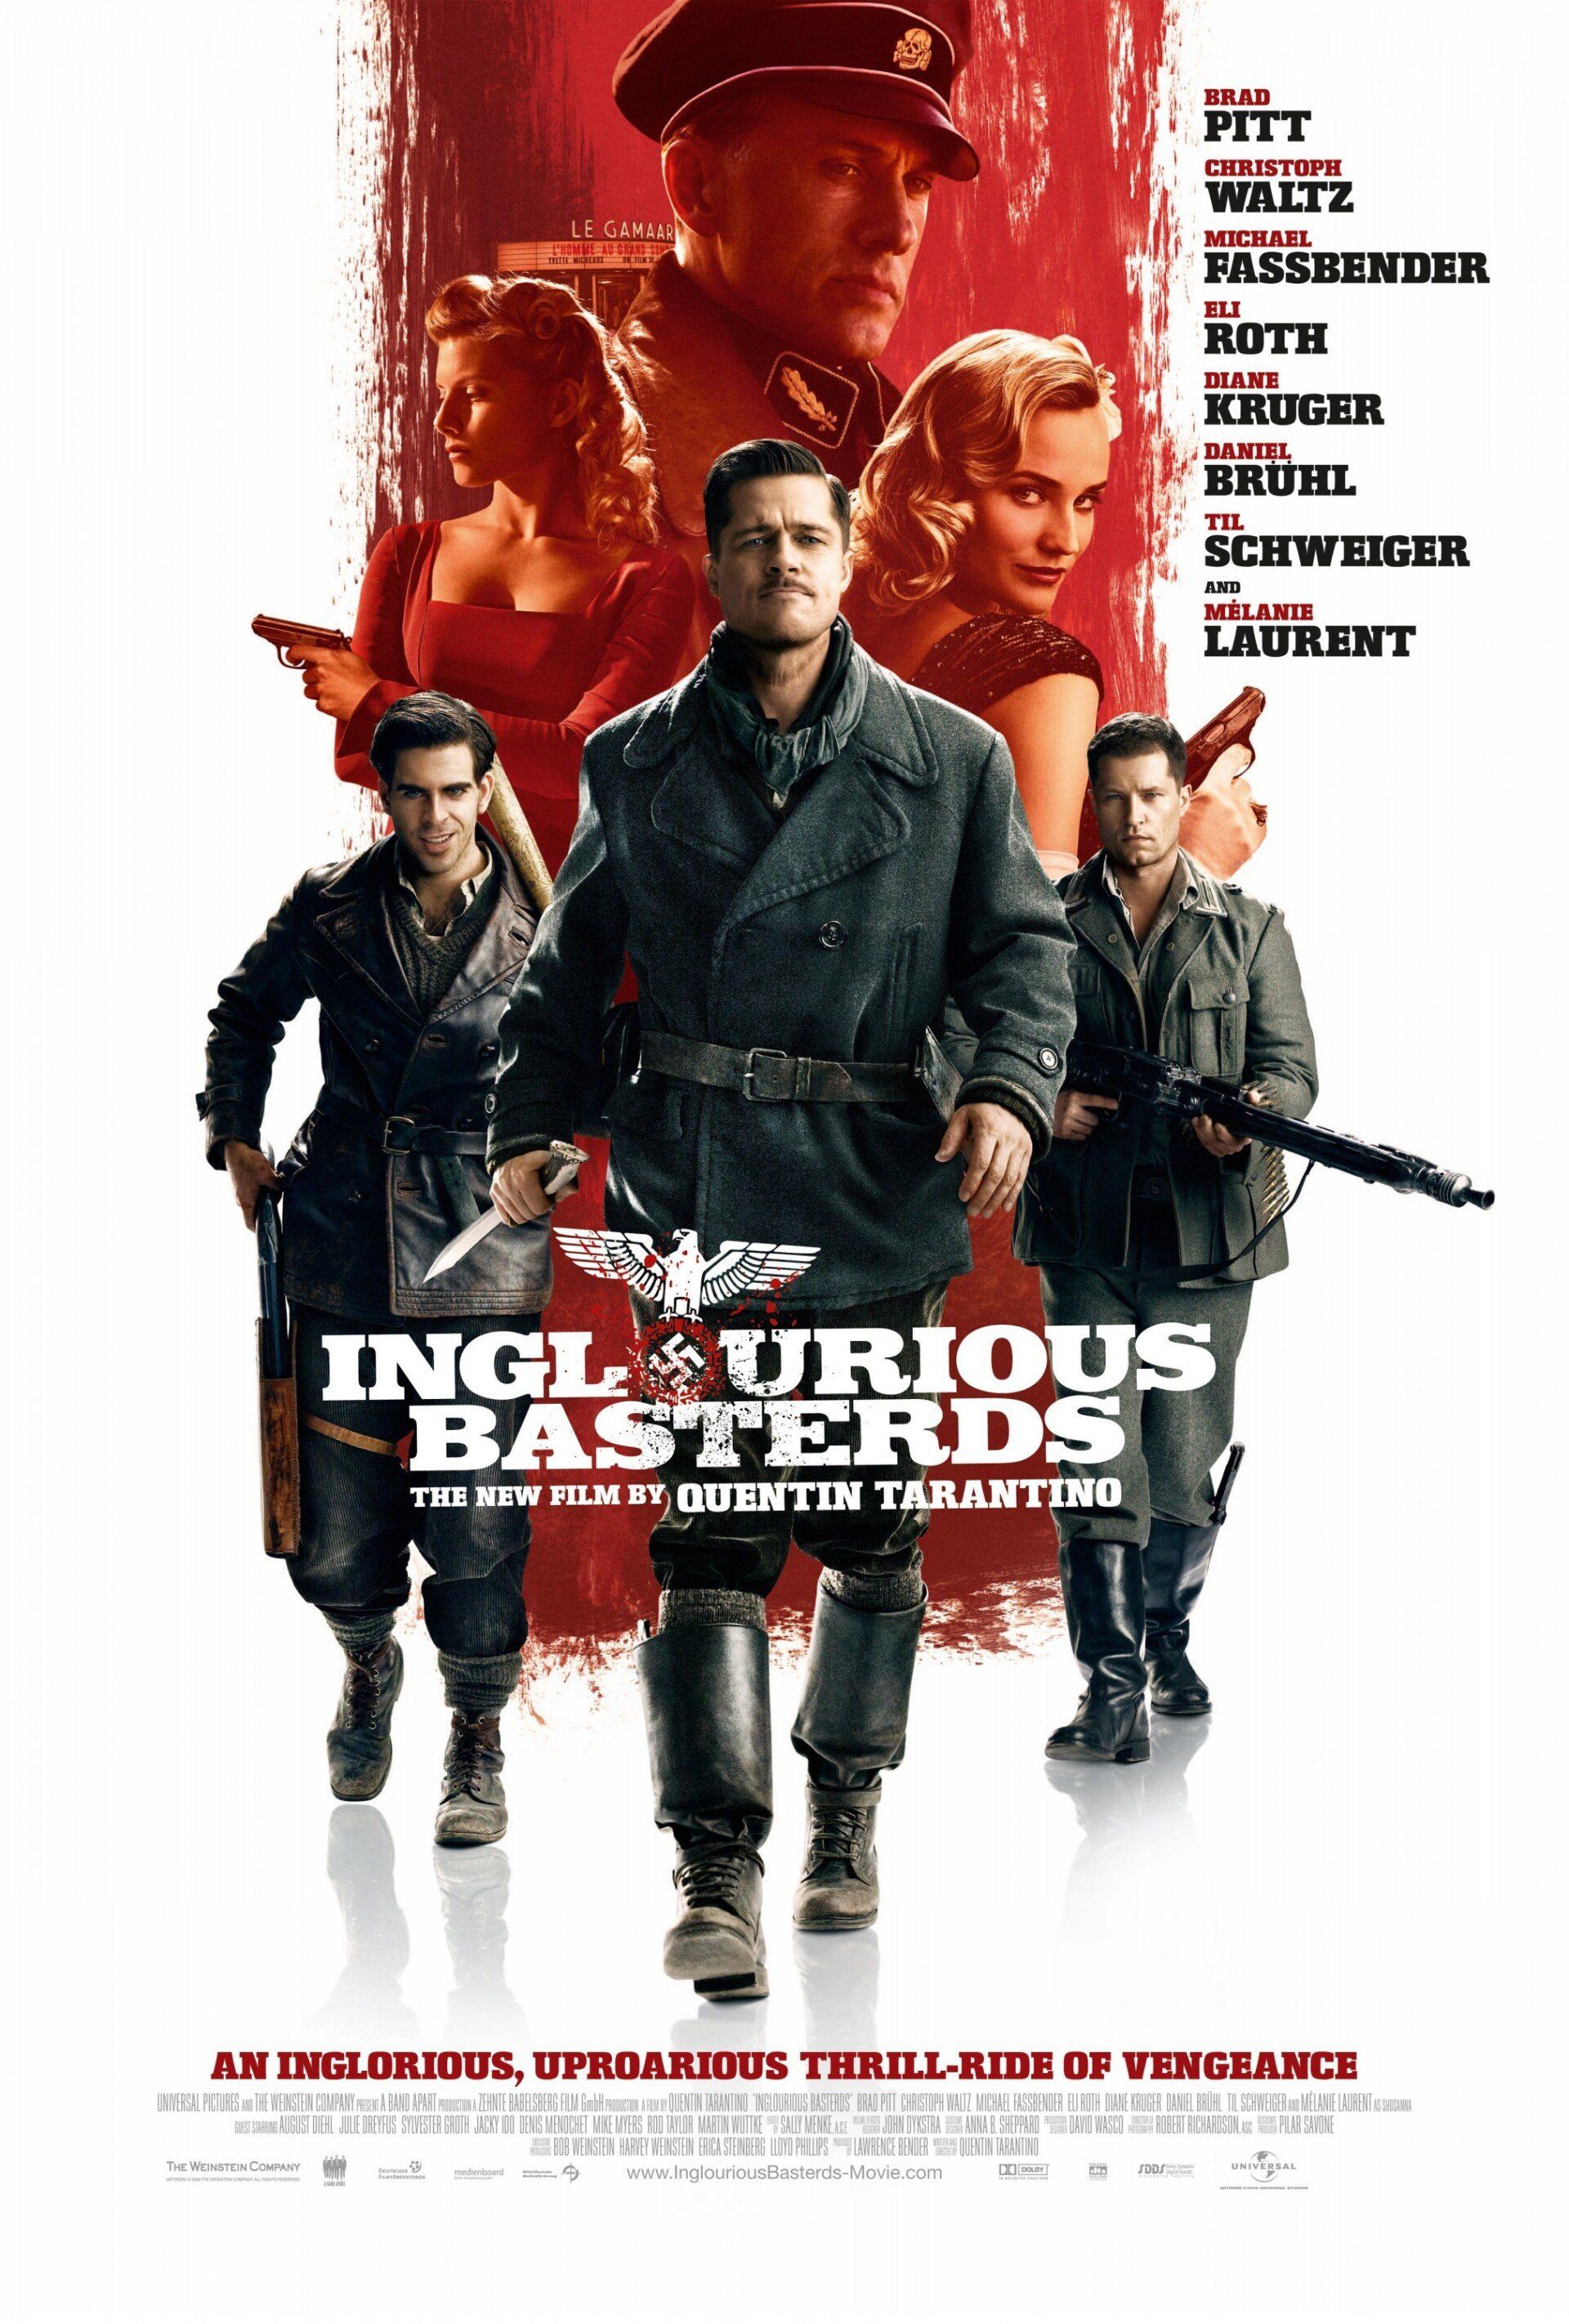 Ferdi showcased his stunt expertise by working on Quentin Tarantino's acclaimed film, 'Inglourious Basterds'